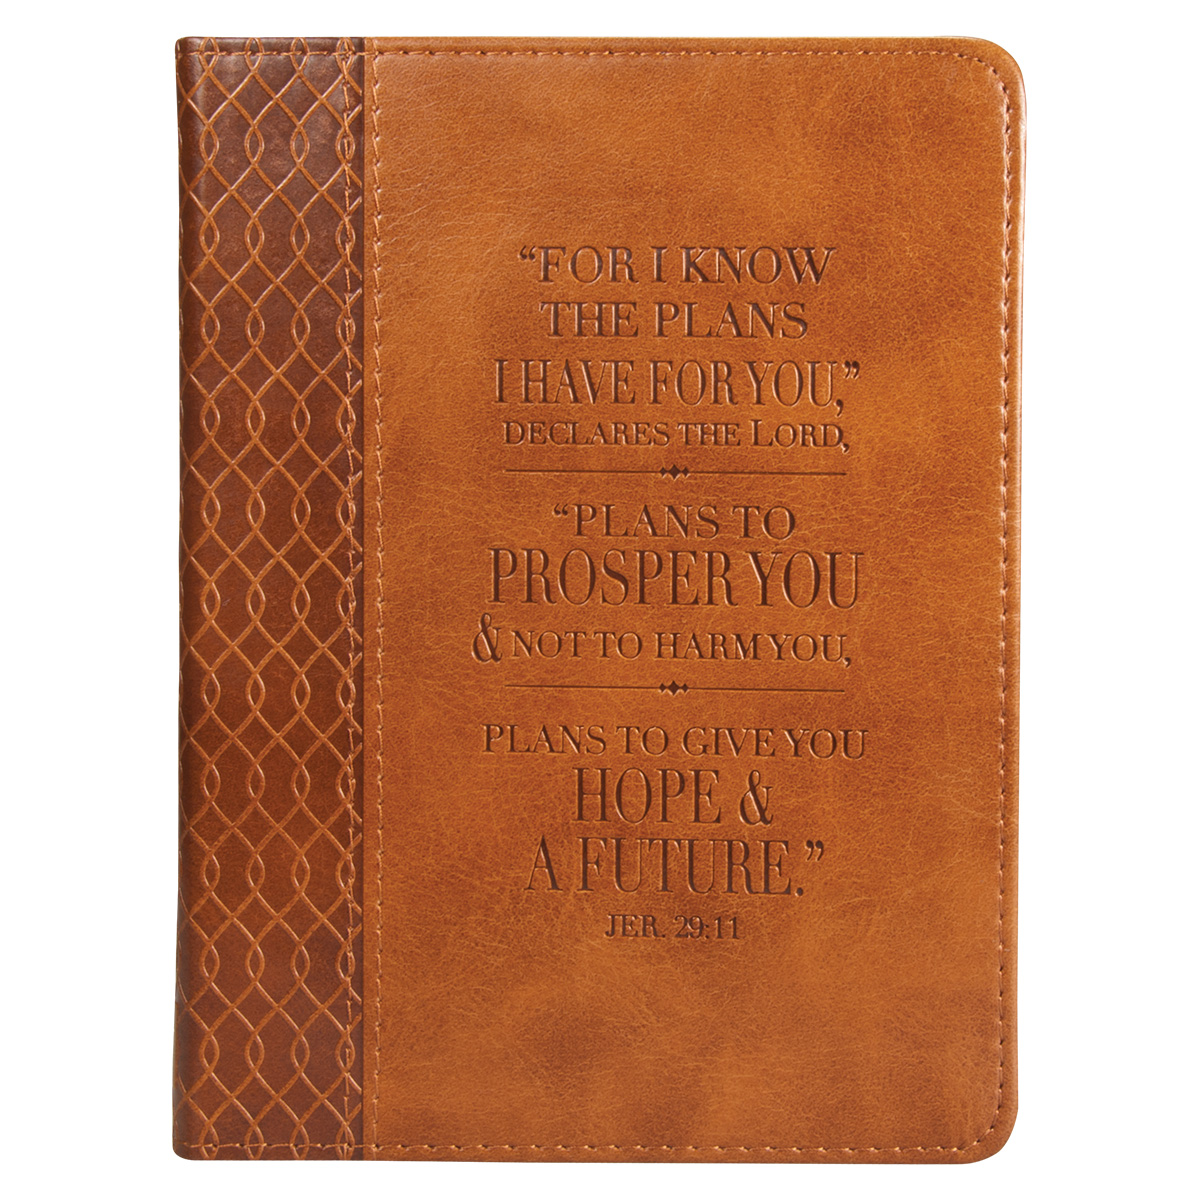 Christian Art Gifts Classic Handy-sized Journal for I Know The Plans Jeremiah 29:11 Bible Verse Inspirational Scripture Notebook with Ribbon 240 Ruled Pages, 5.7" x 7", Tan - image 1 of 6